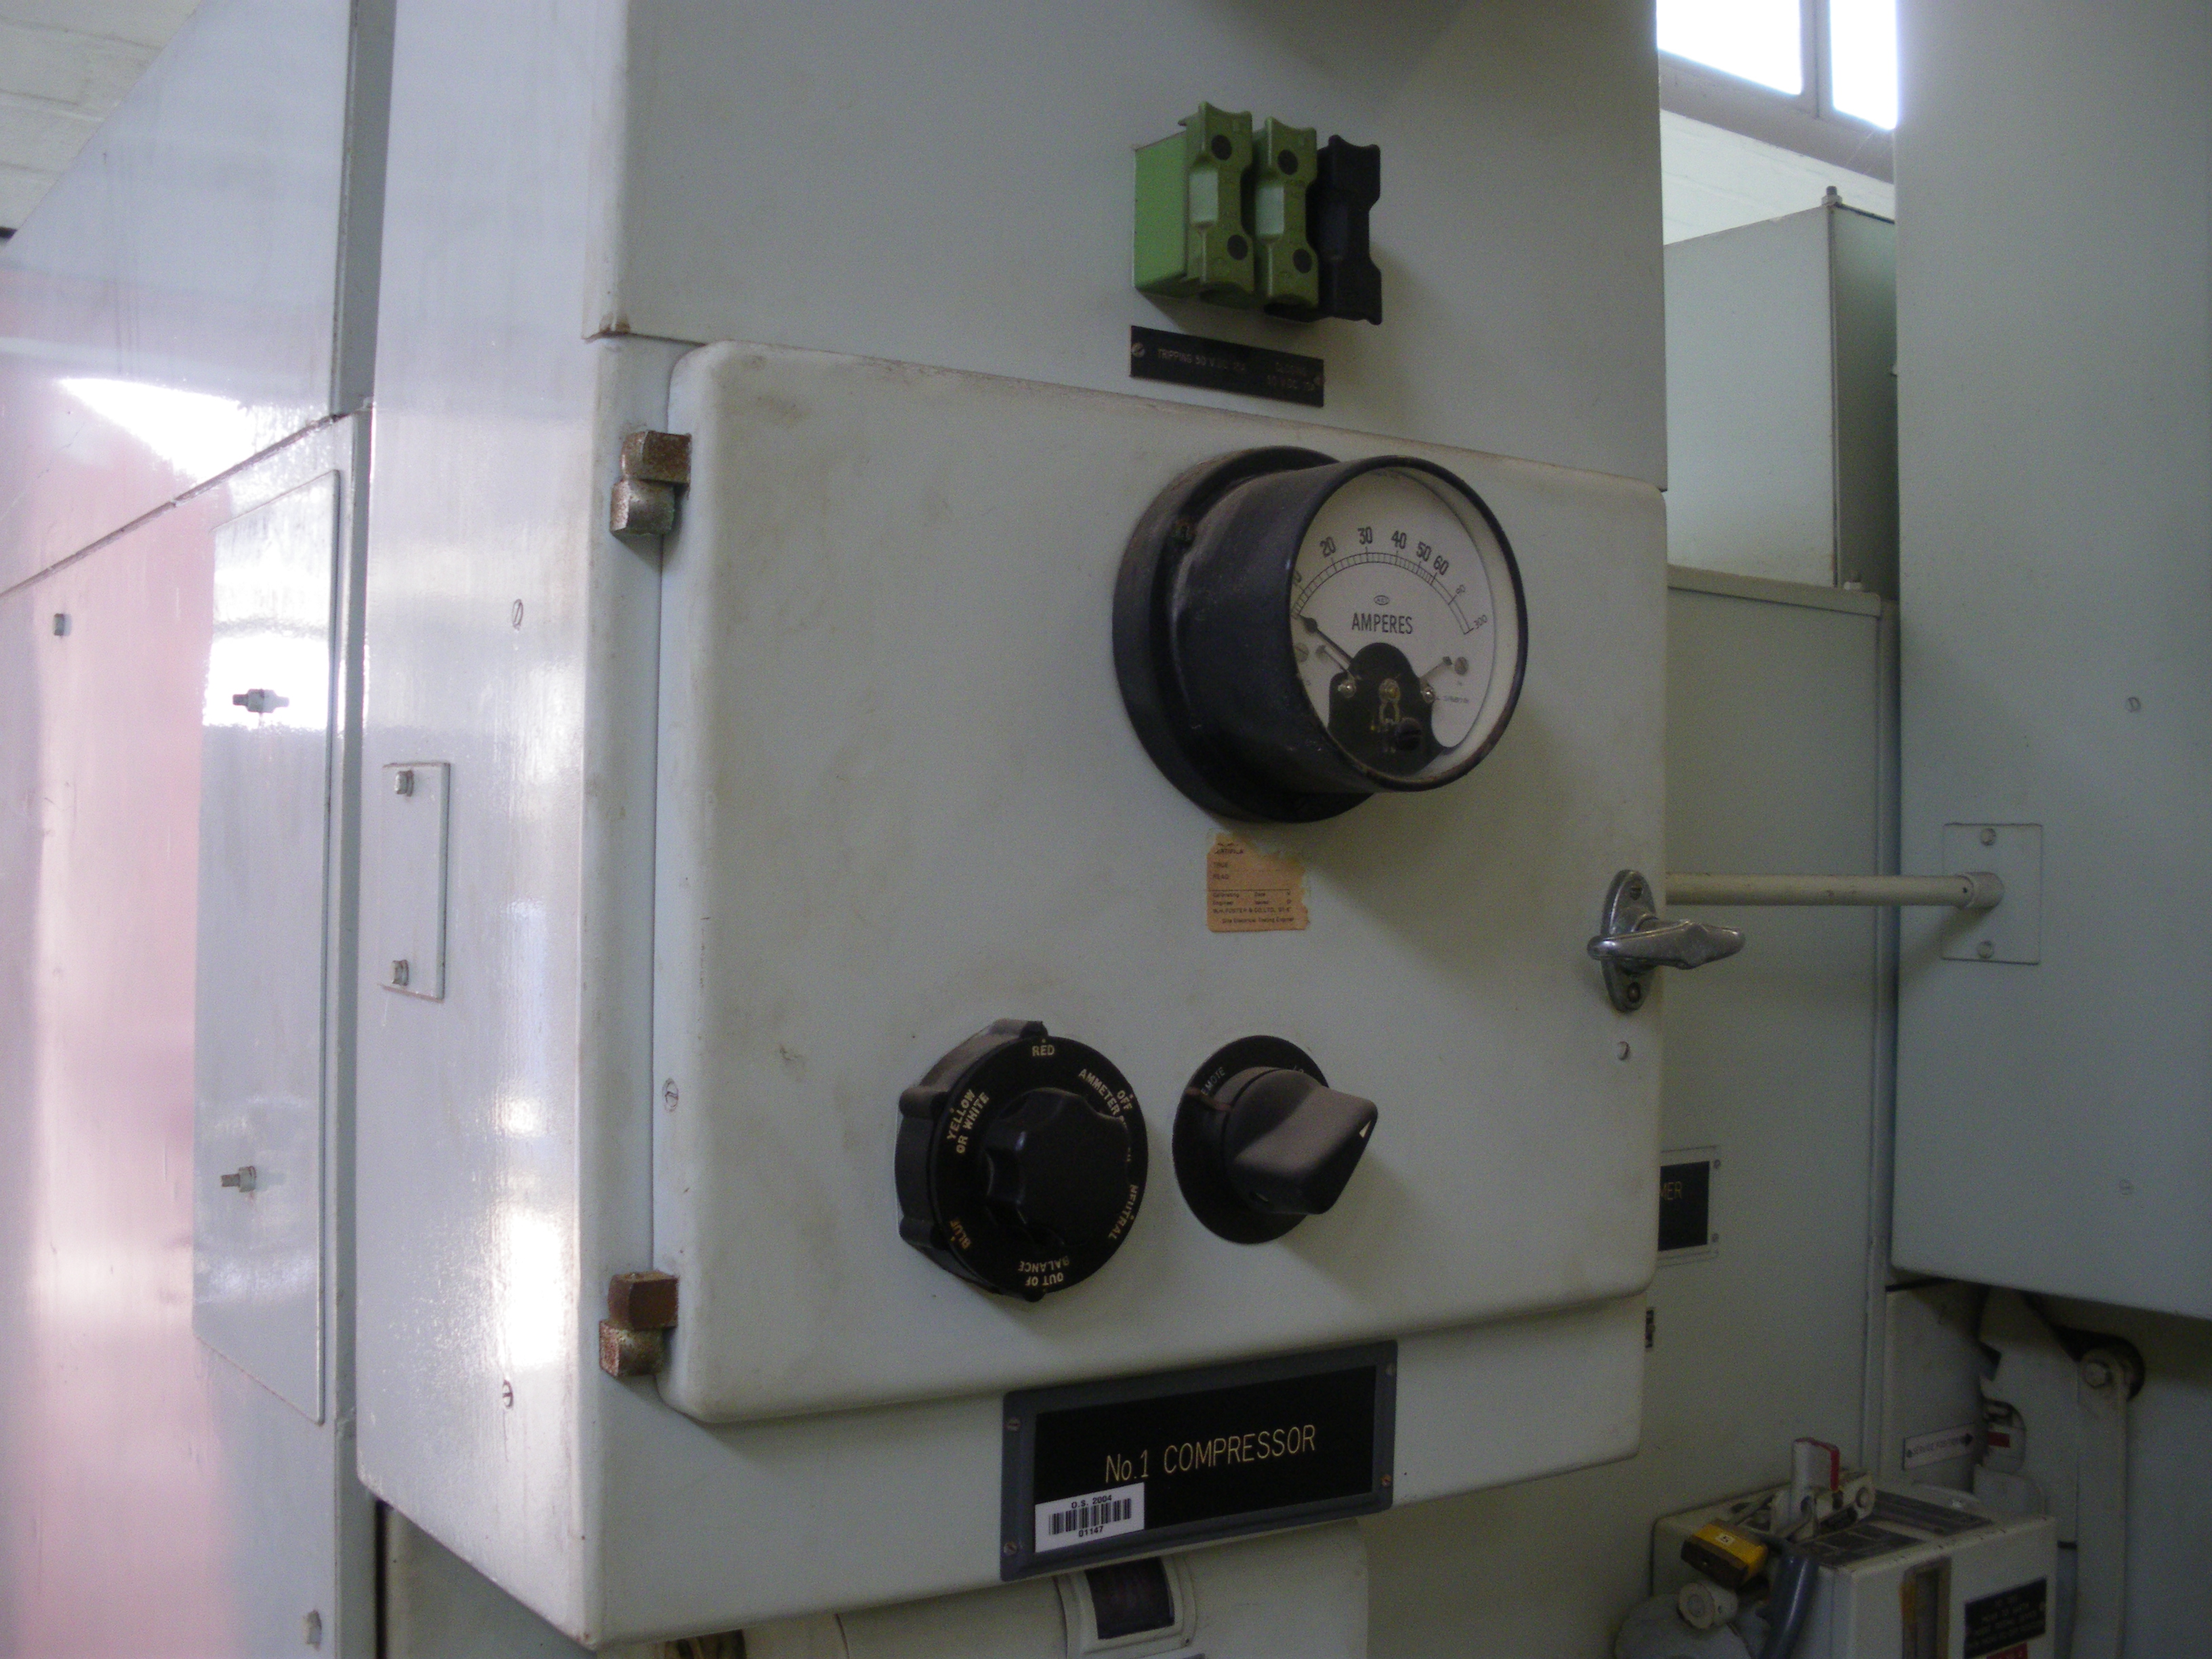 Substation - switchgear for chiller no. 1